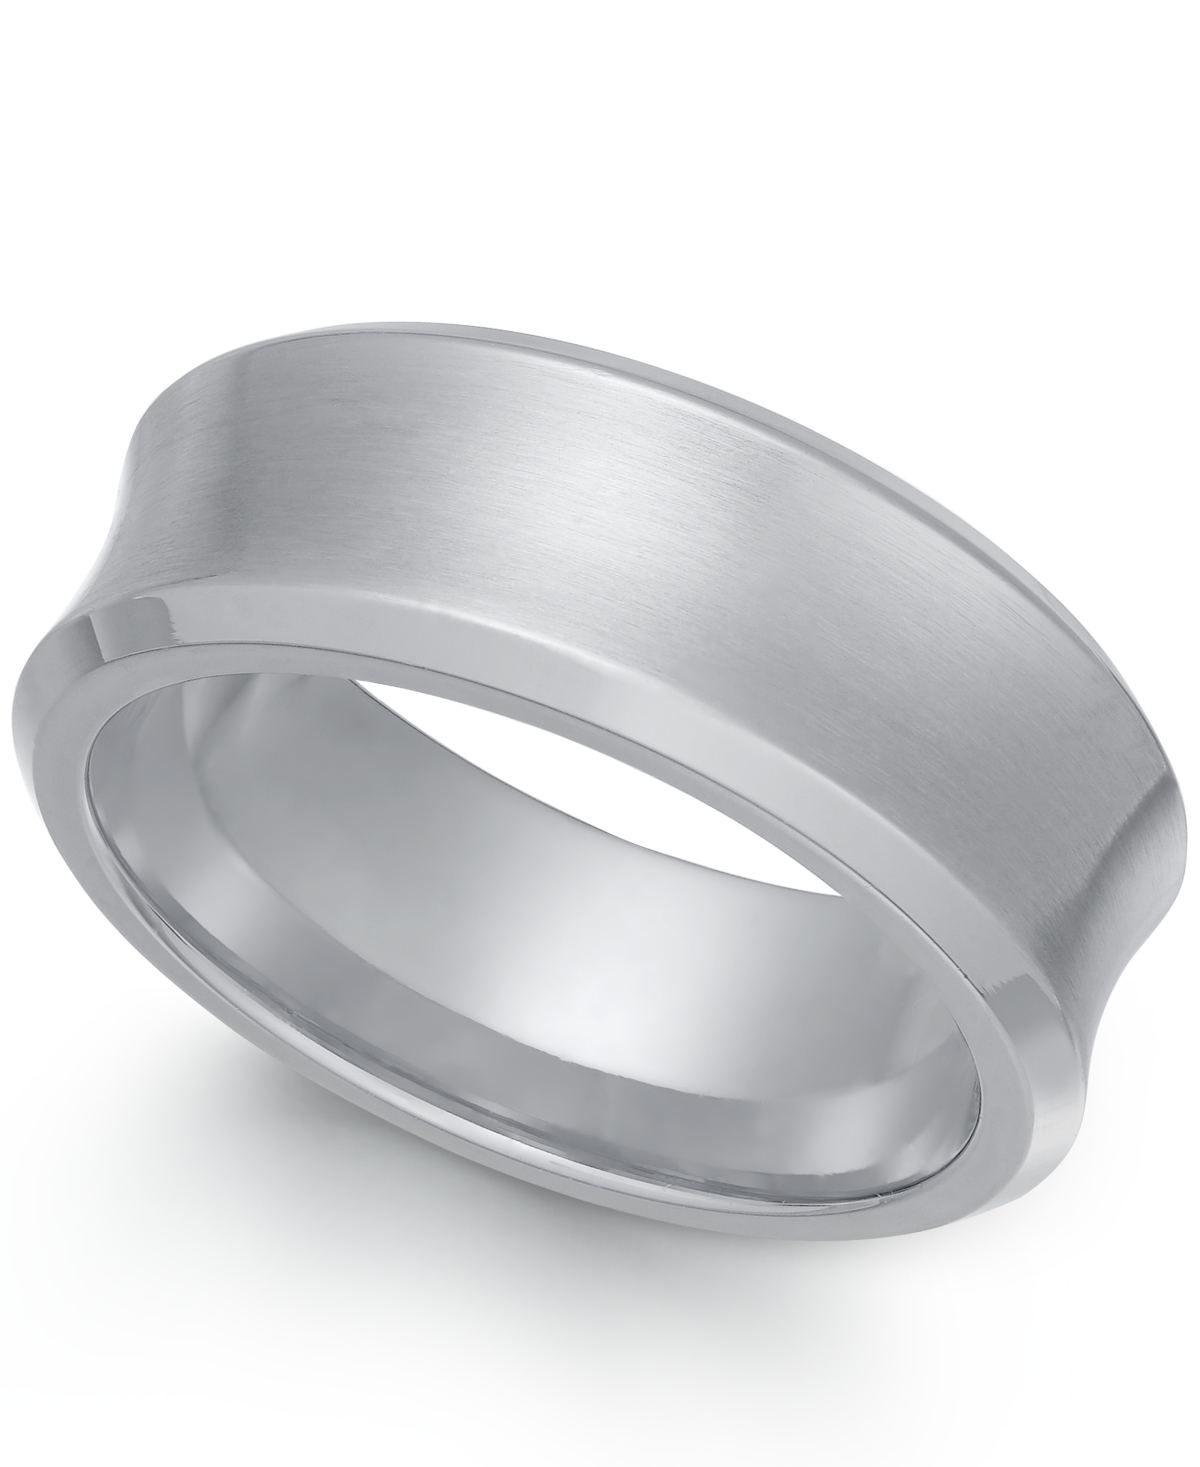 Stainless Steel Men's Matte Finish Concave Ring - Silver